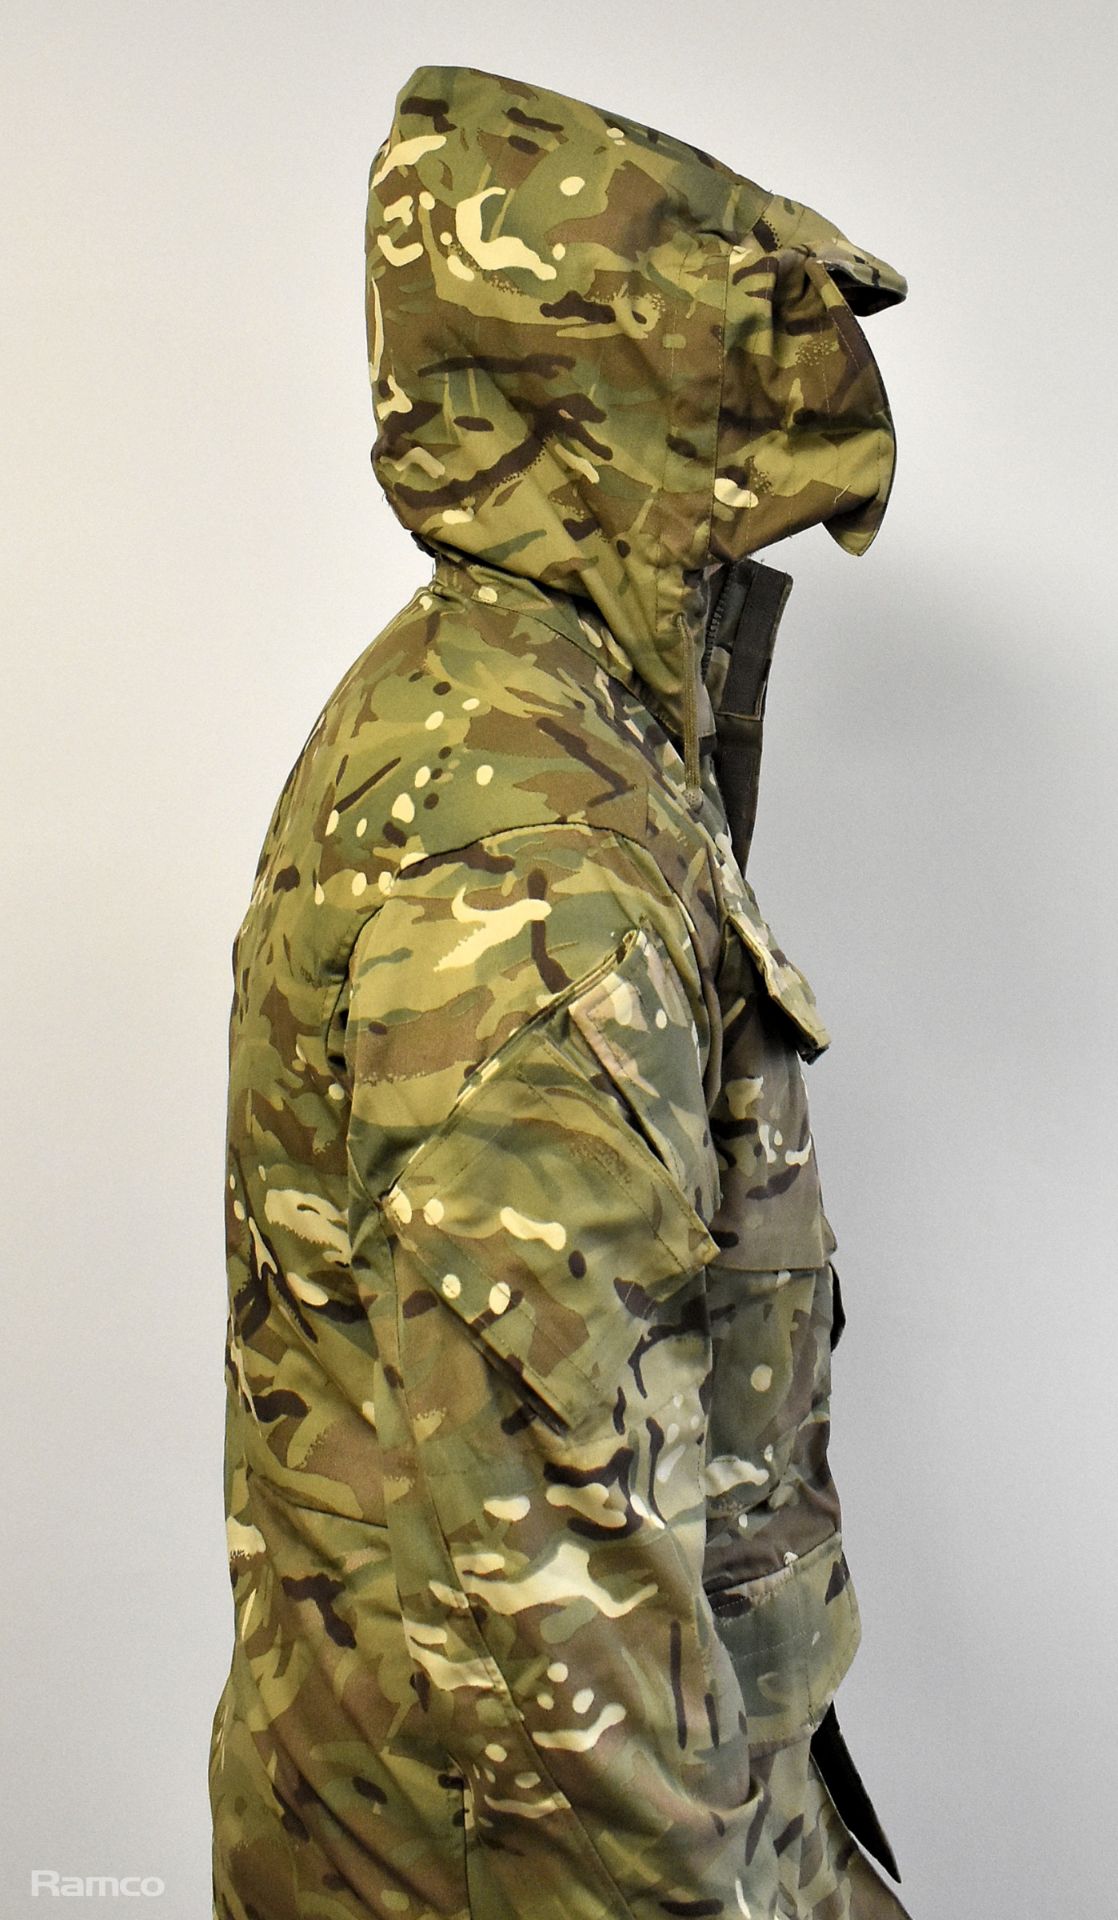 40x British Army MTP combat smocks 2 windproof - mixed grades and sizes - Image 5 of 12